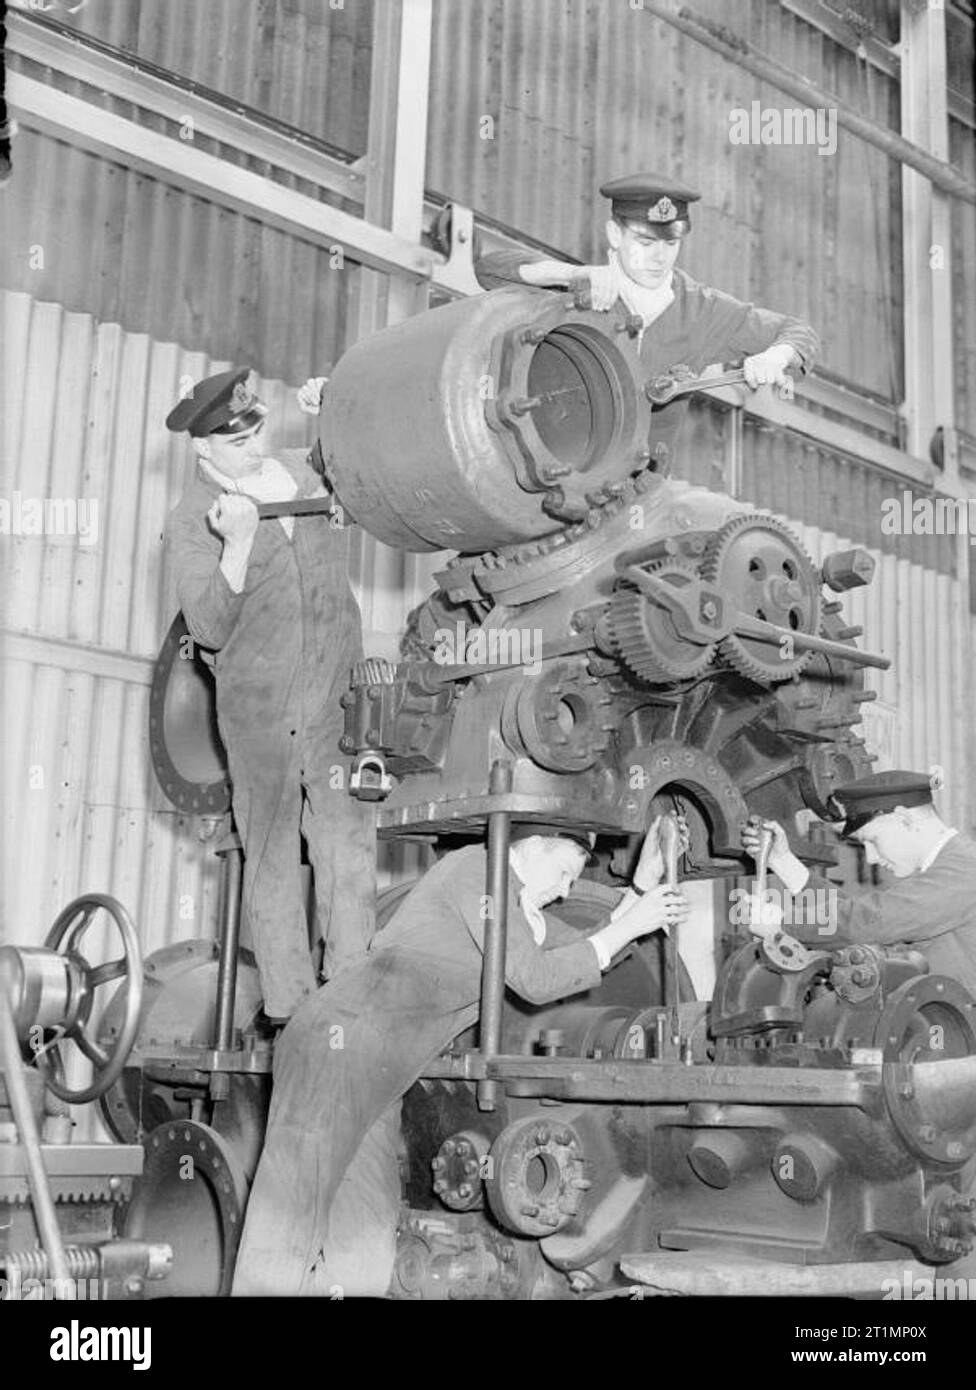 The Royal Navy during the Second World War Royal Navy engineers must be capable of tackling the heaviest types of job before leaving the college. Here are some at work on a marine steam turbine out of a destroyer at the Royal Naval Engineering College, Keyham, Devonport. Here officers are trained for the engineering branch of the Royal Navy. Stock Photo